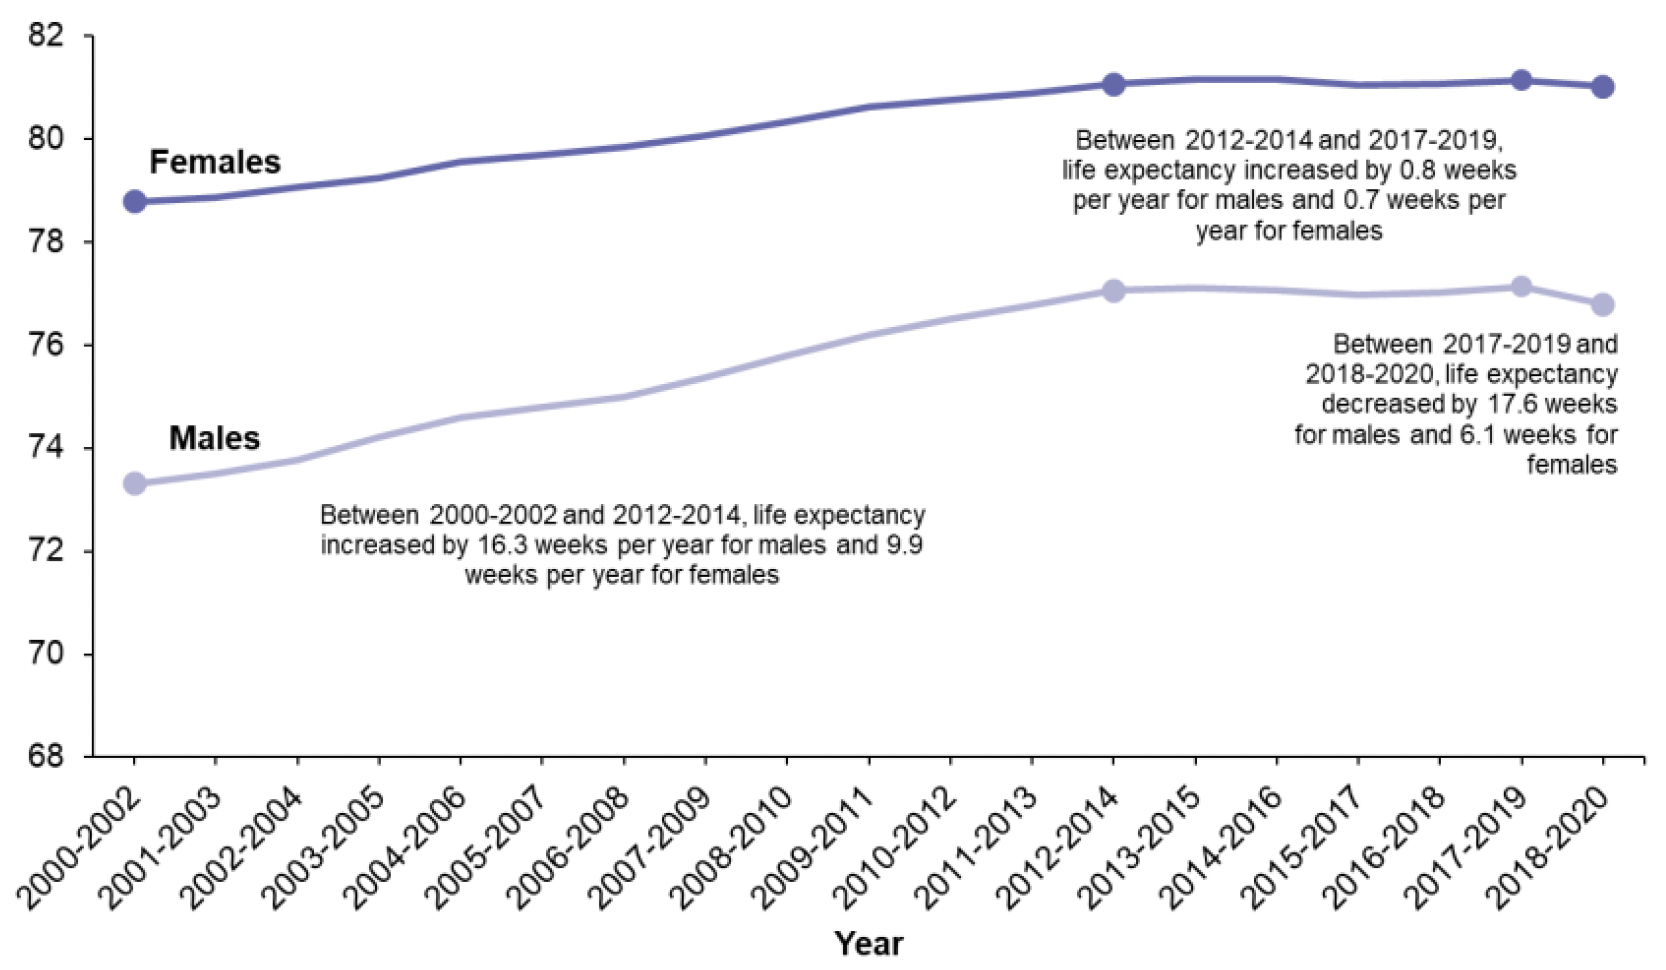 Line chart showing that:
• Between 2000-2002 and 2012-2014, life expectancy increased by 16.3 weeks per year for males and 9.9 weeks per year for females. 
• Between 2012-2014 and 2017-2019, life expectancy increased by 0.8 weeks per year for males and 0.7 weeks per year for females.
• Between 2017-2019 and 2018-2020, life expectancy decreased by 17.6 weeks for males and 6.1 weeks for females.
